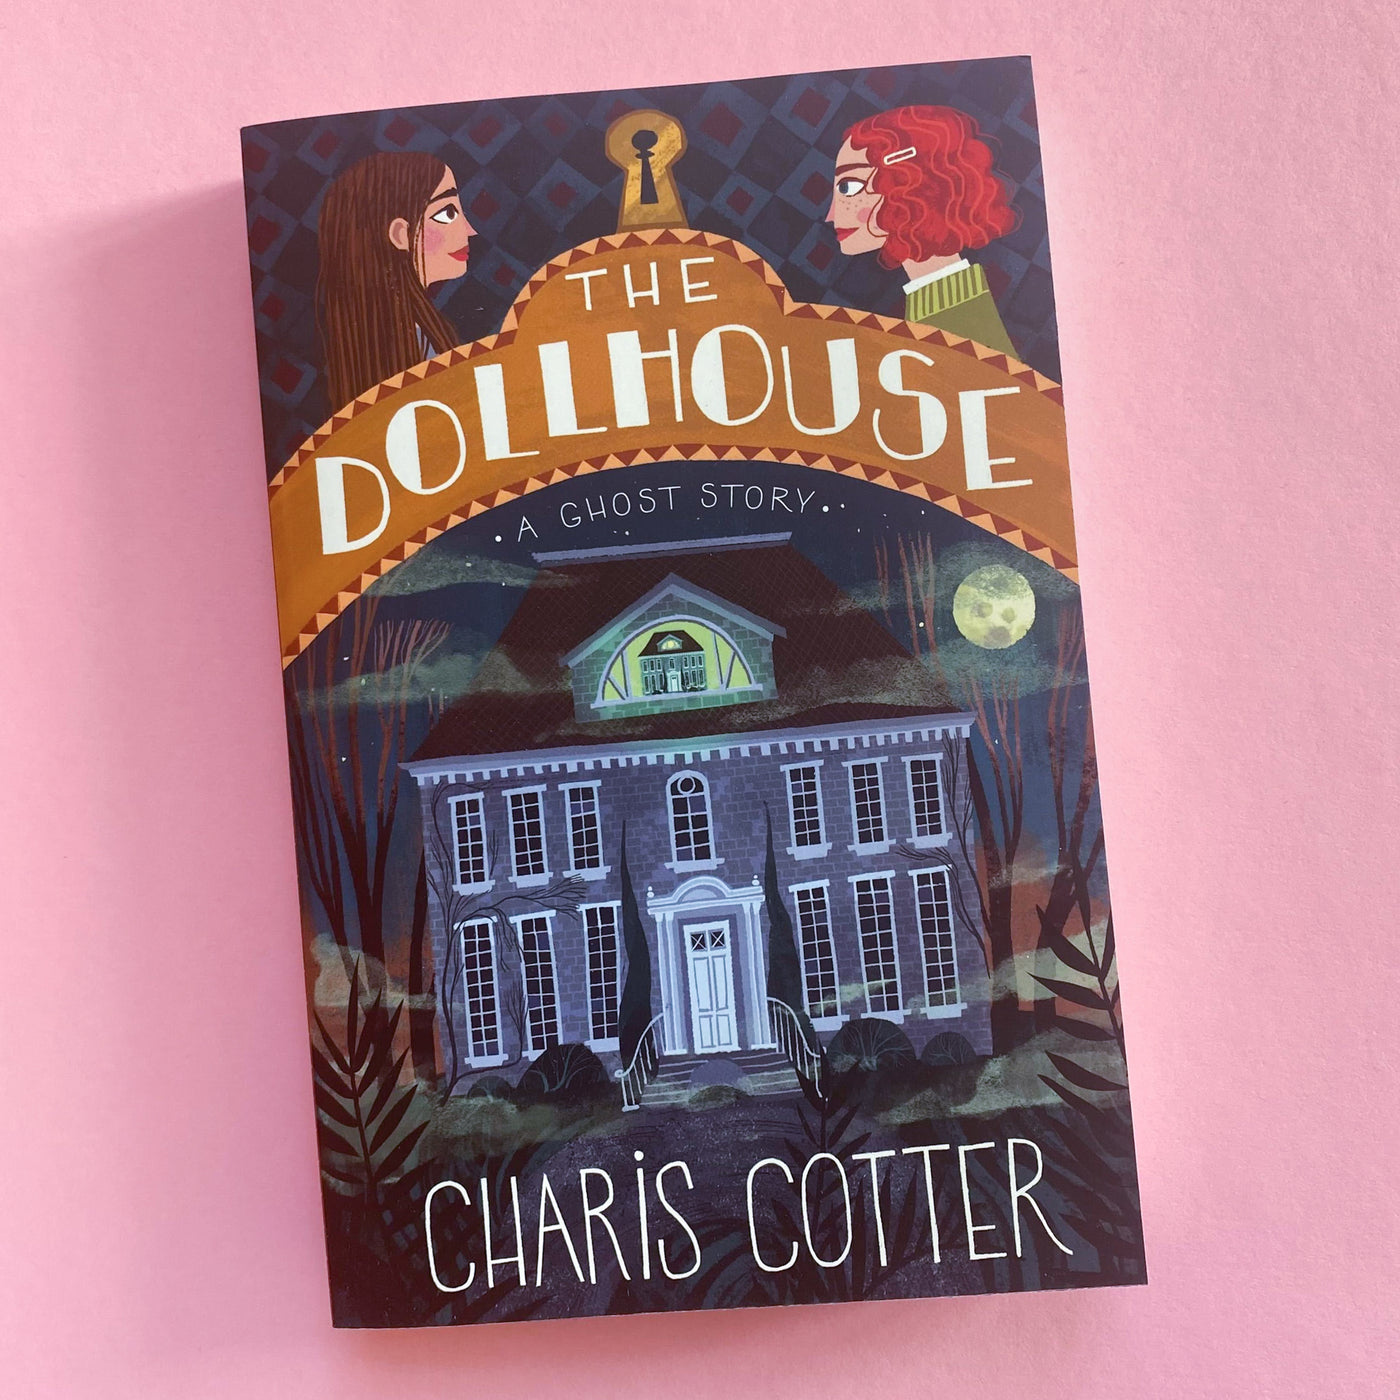 The Dollhouse: A Ghost Story by Charis Cotter